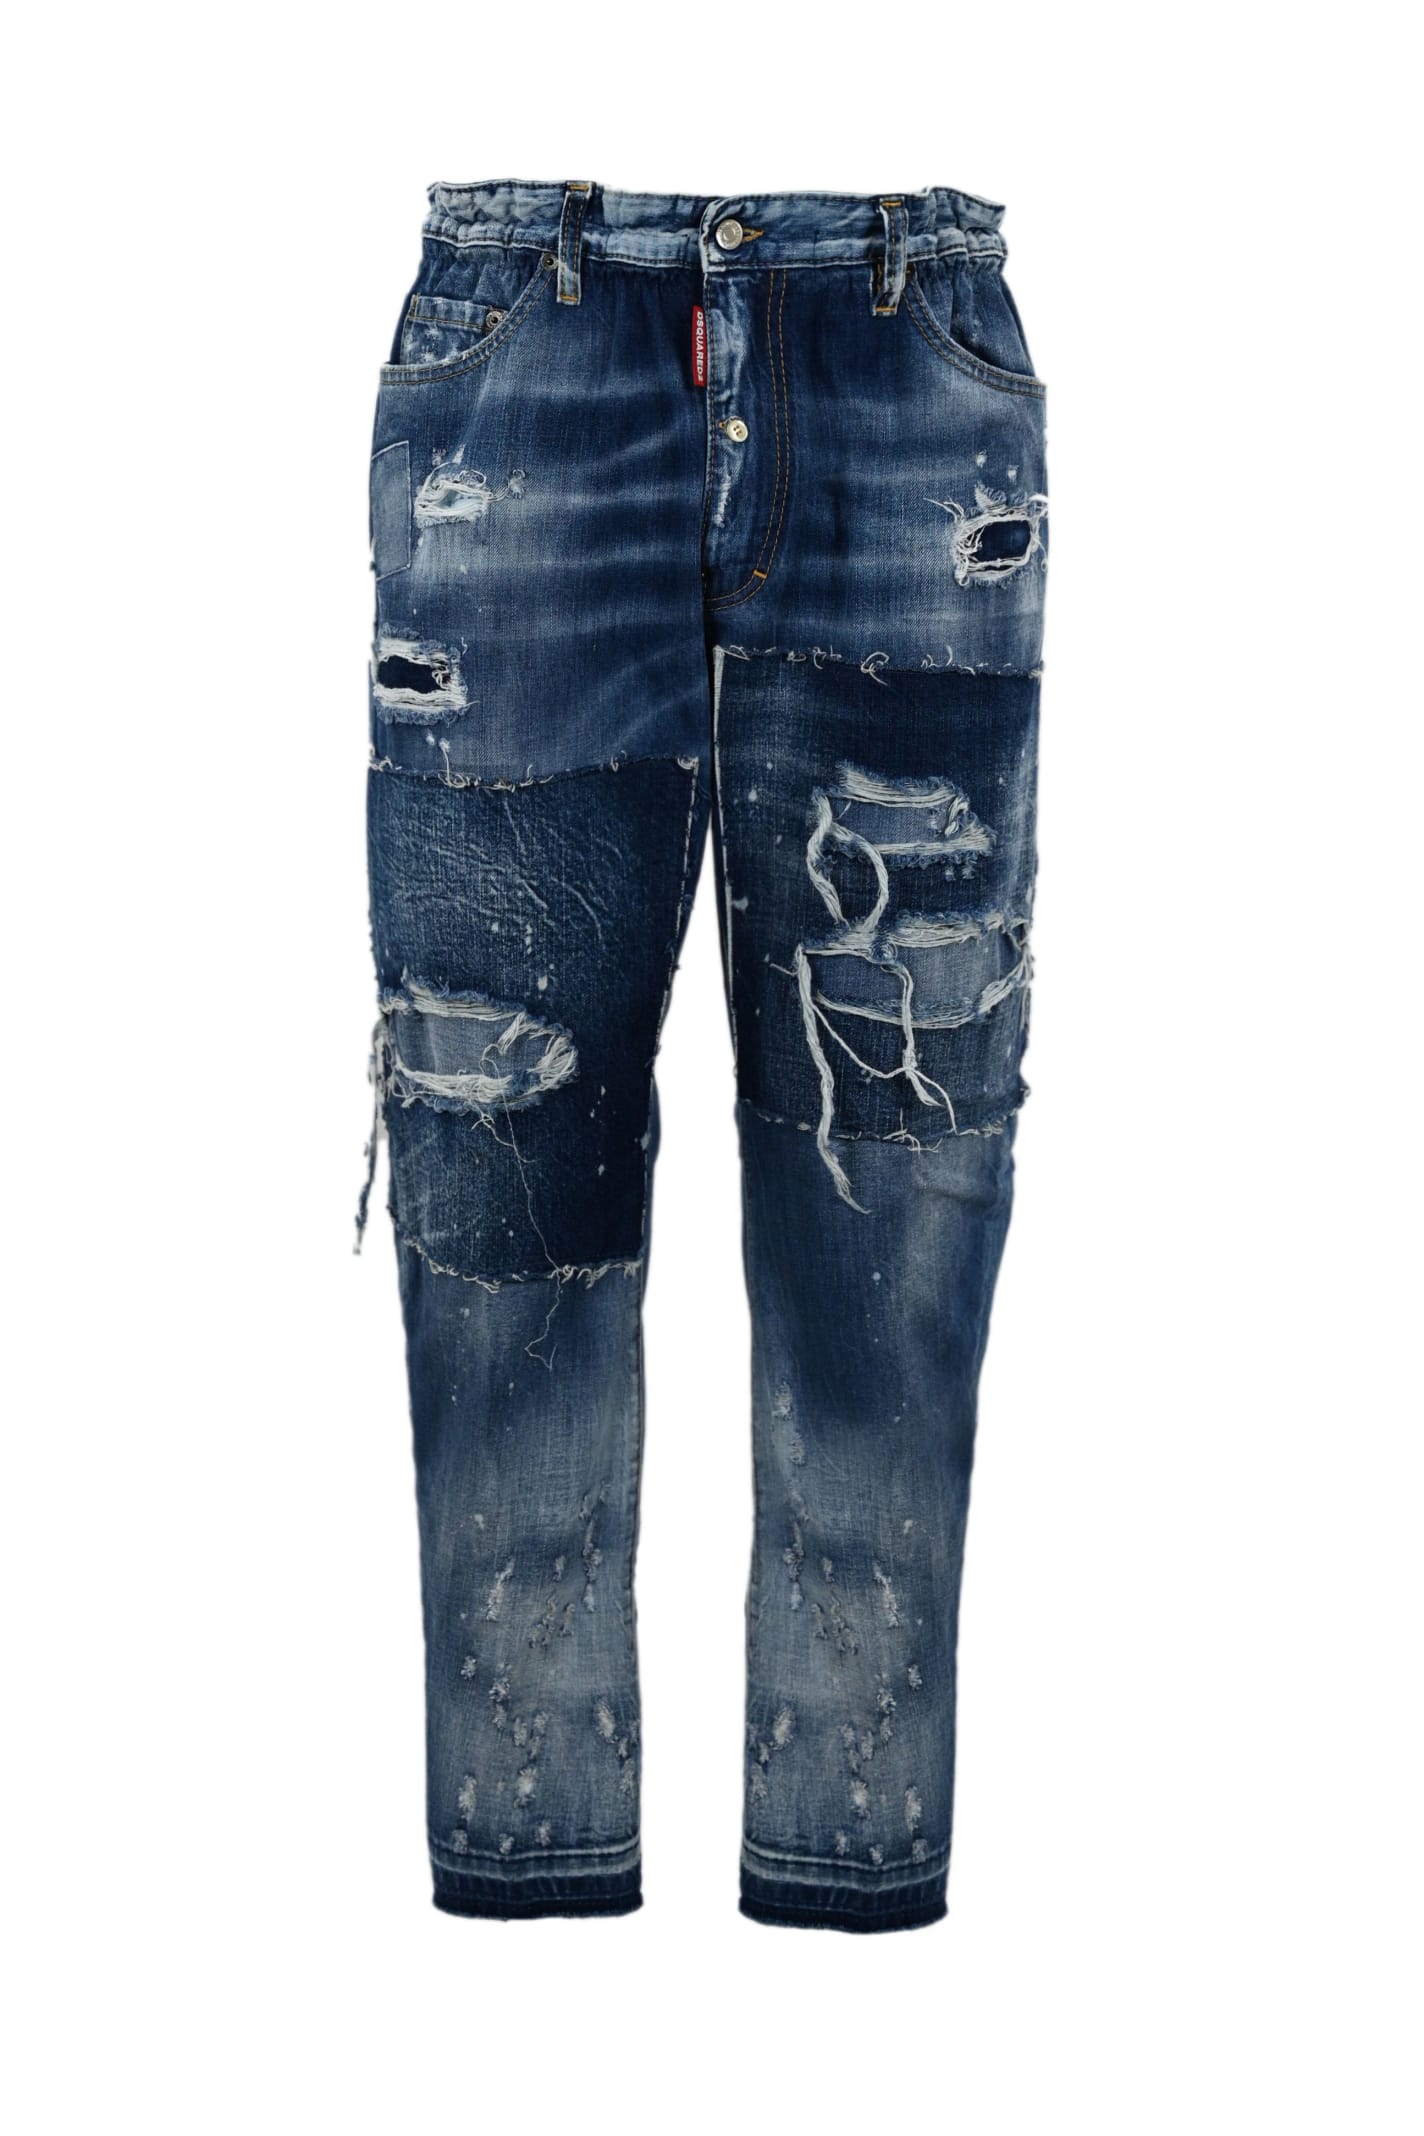 Dsquared2 Big Brother Denim Trousers